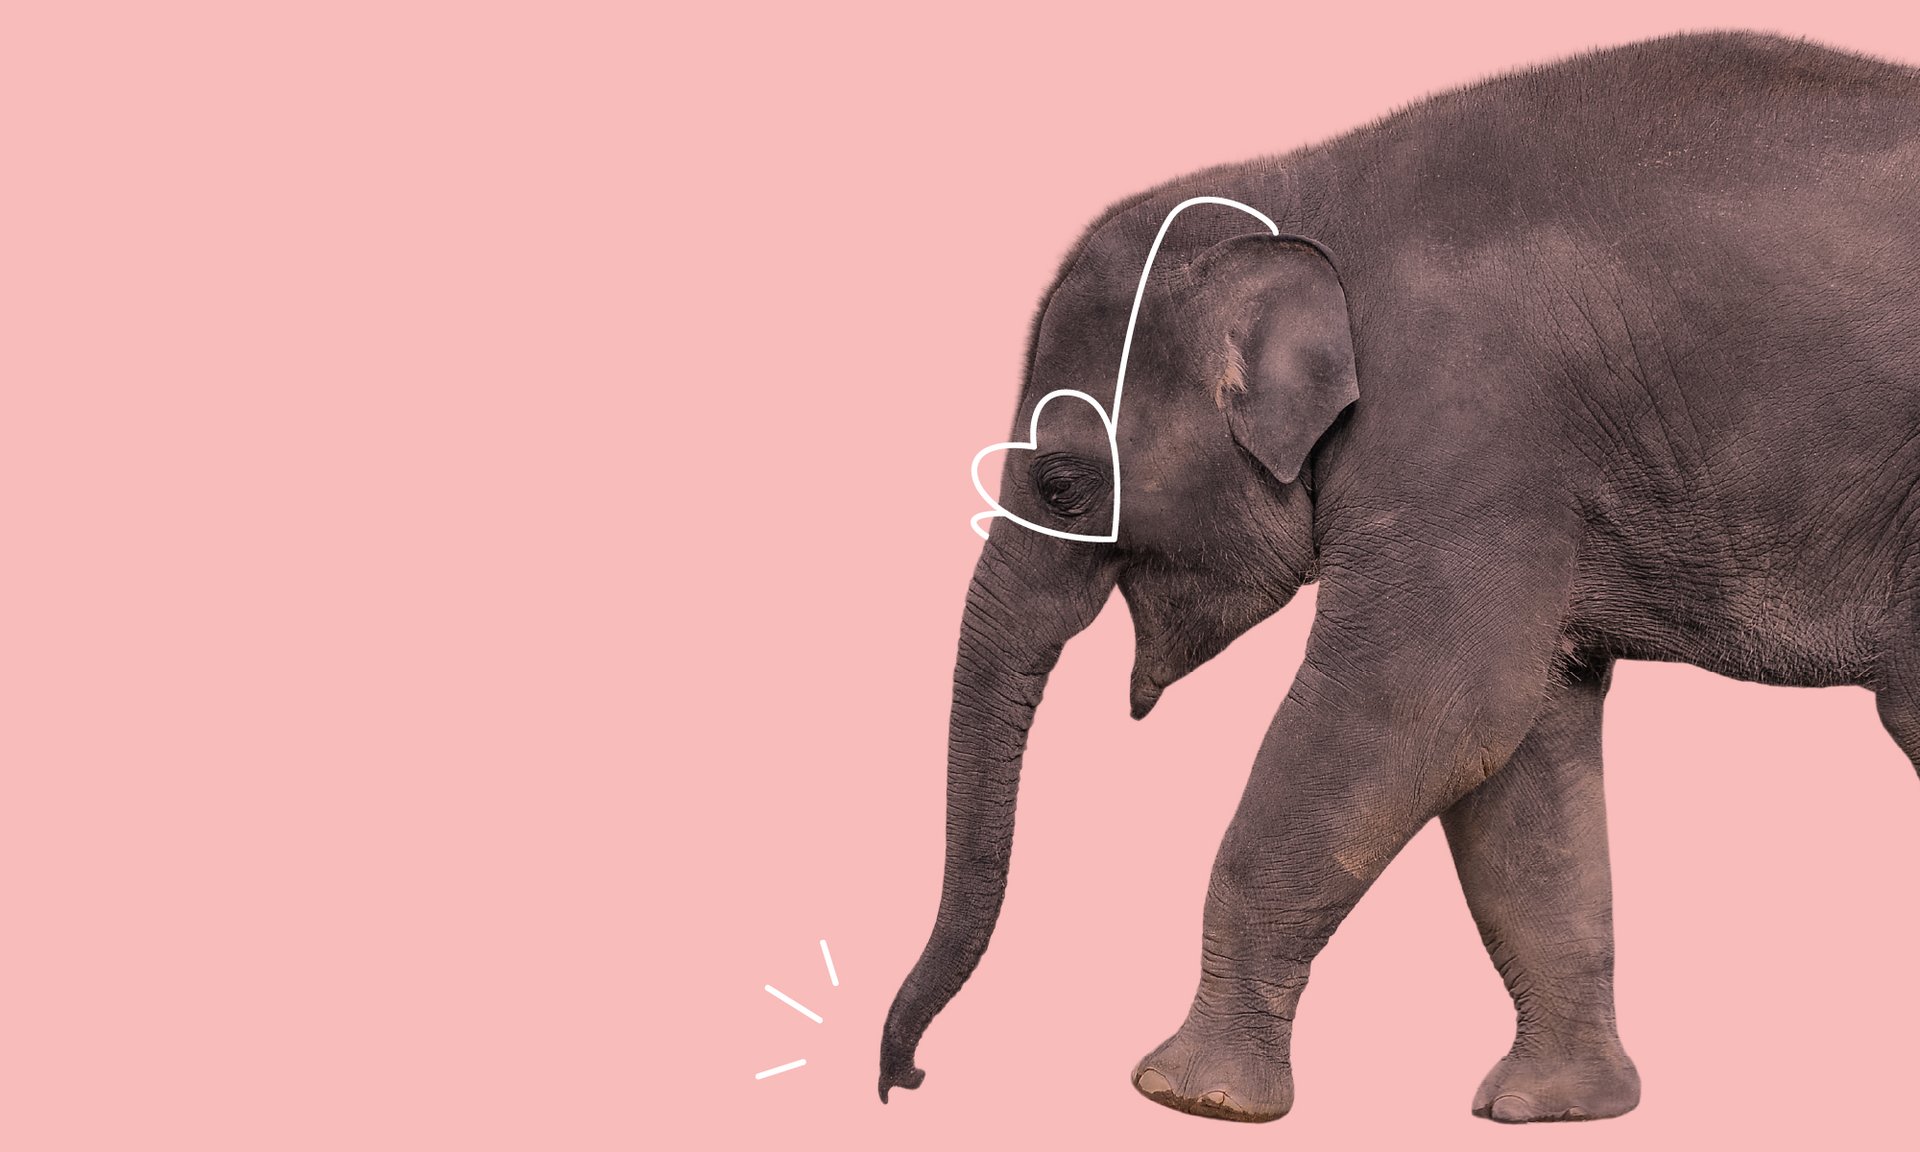 Illustration of an elephant with heart-shaped glasses